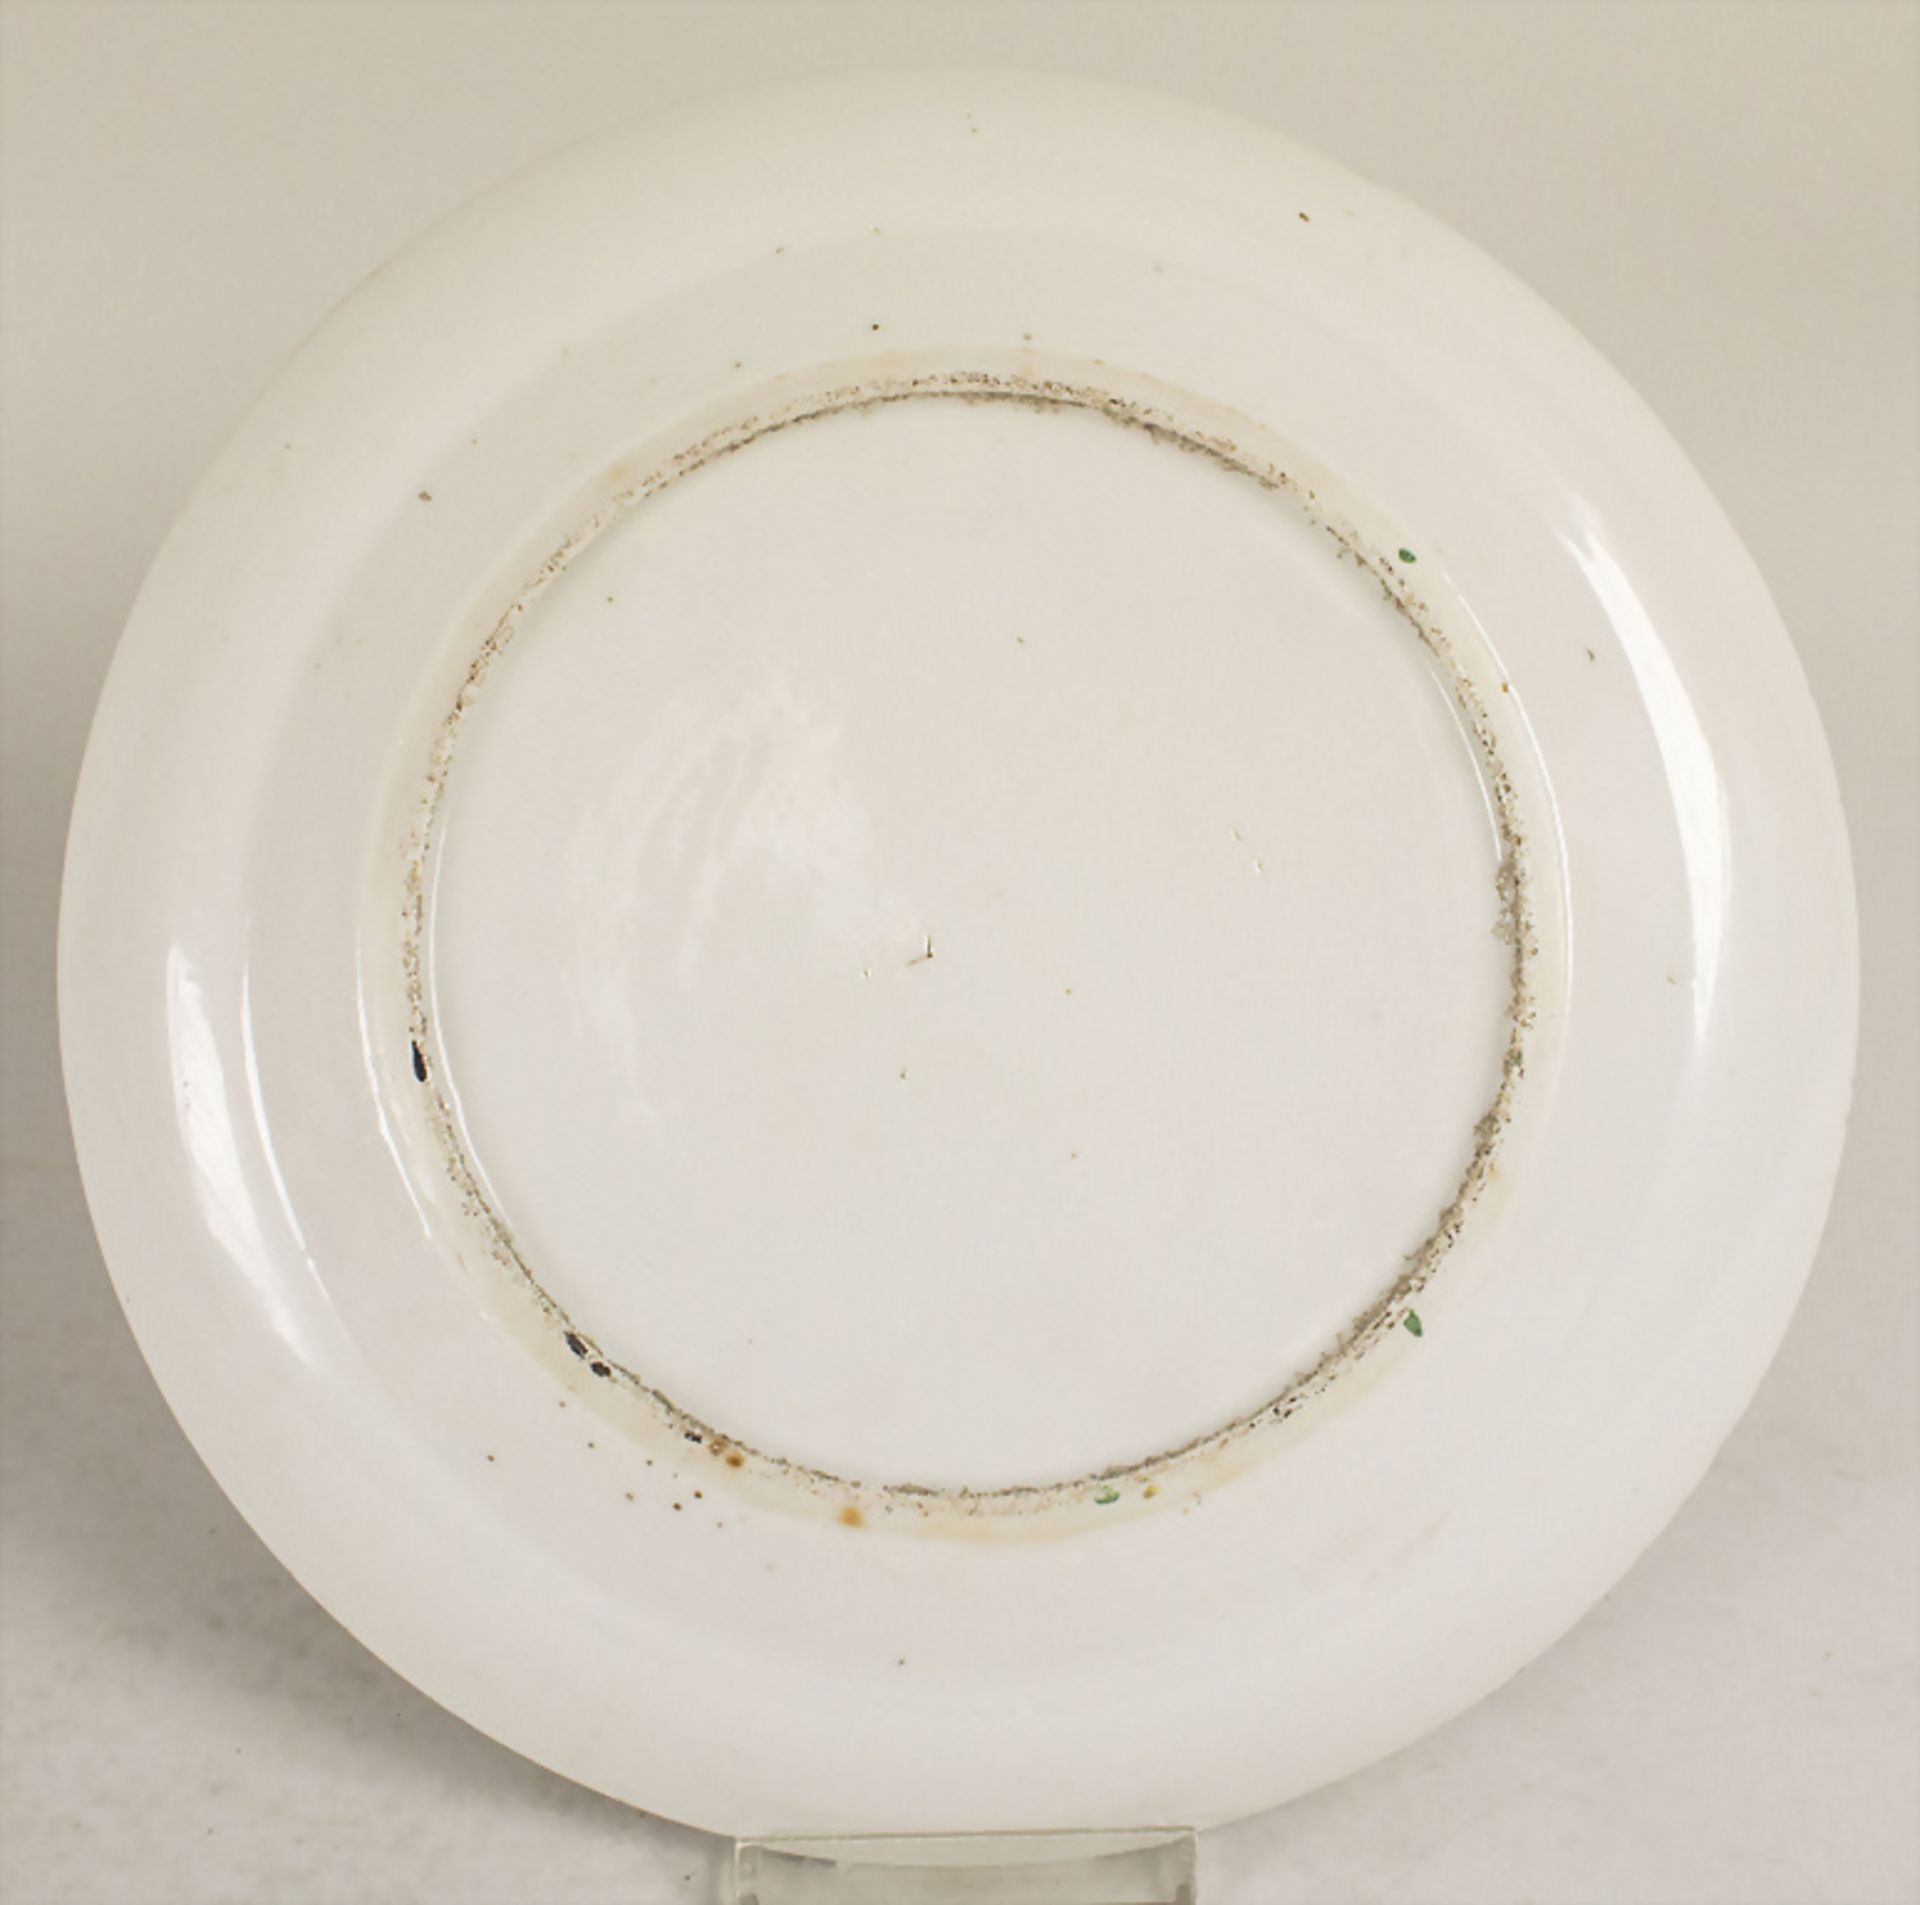 Teller / A plate, China, Qing Dynastie (1644-1911), wohl 18. Jh. - Image 2 of 2